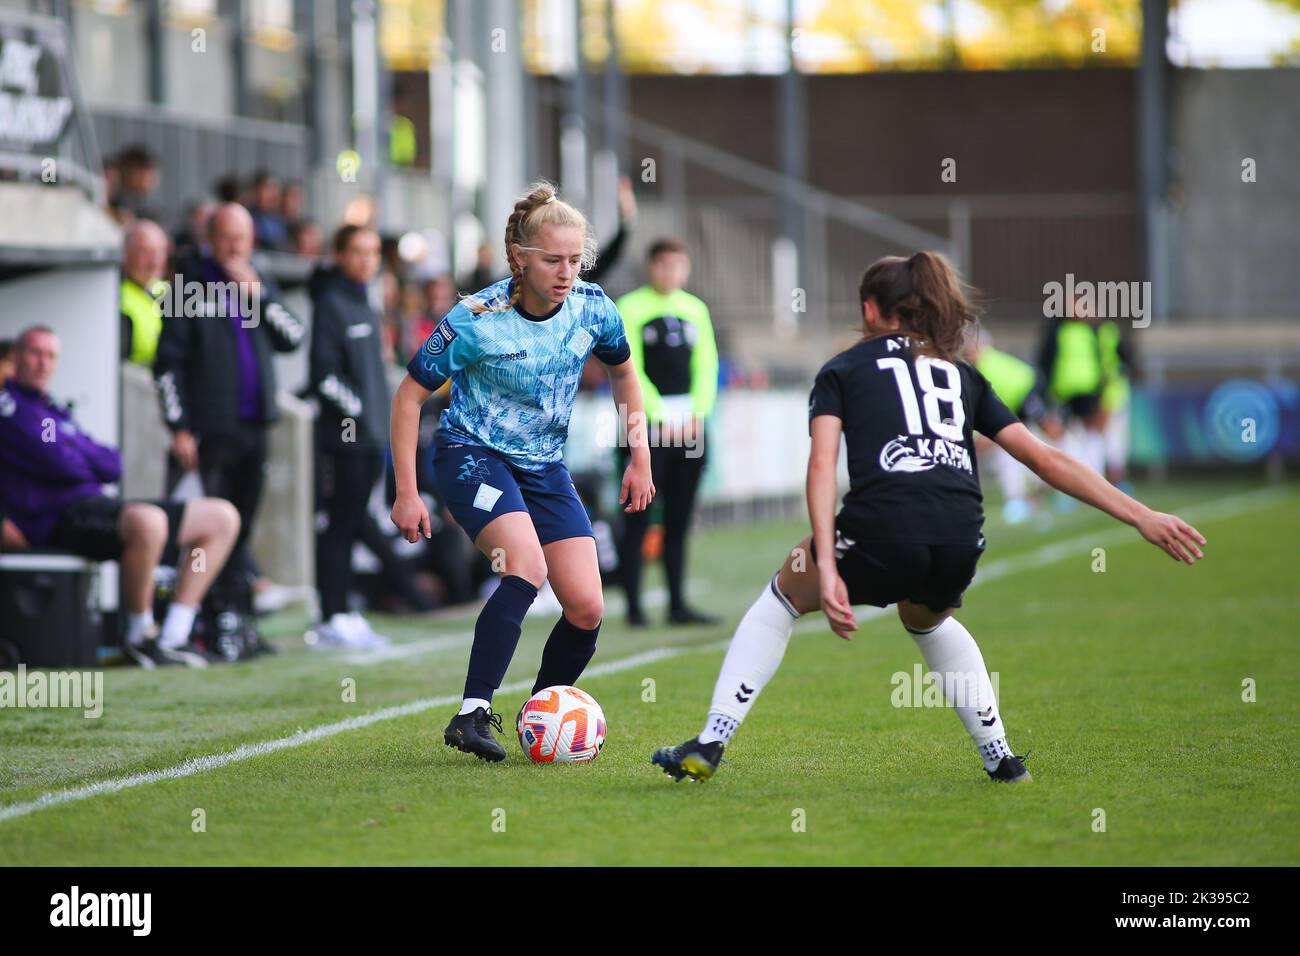 London, UK. 25th Sep, 2022. Princes Park, London, England, Sep 25th 2022 London City Lionesses on the attack during the FA Women's Championship game between London City Lionesses v Durham at Princes Park London, England (Pedro Soares/SPP) Credit: SPP Sport Press Photo. /Alamy Live News Stock Photo